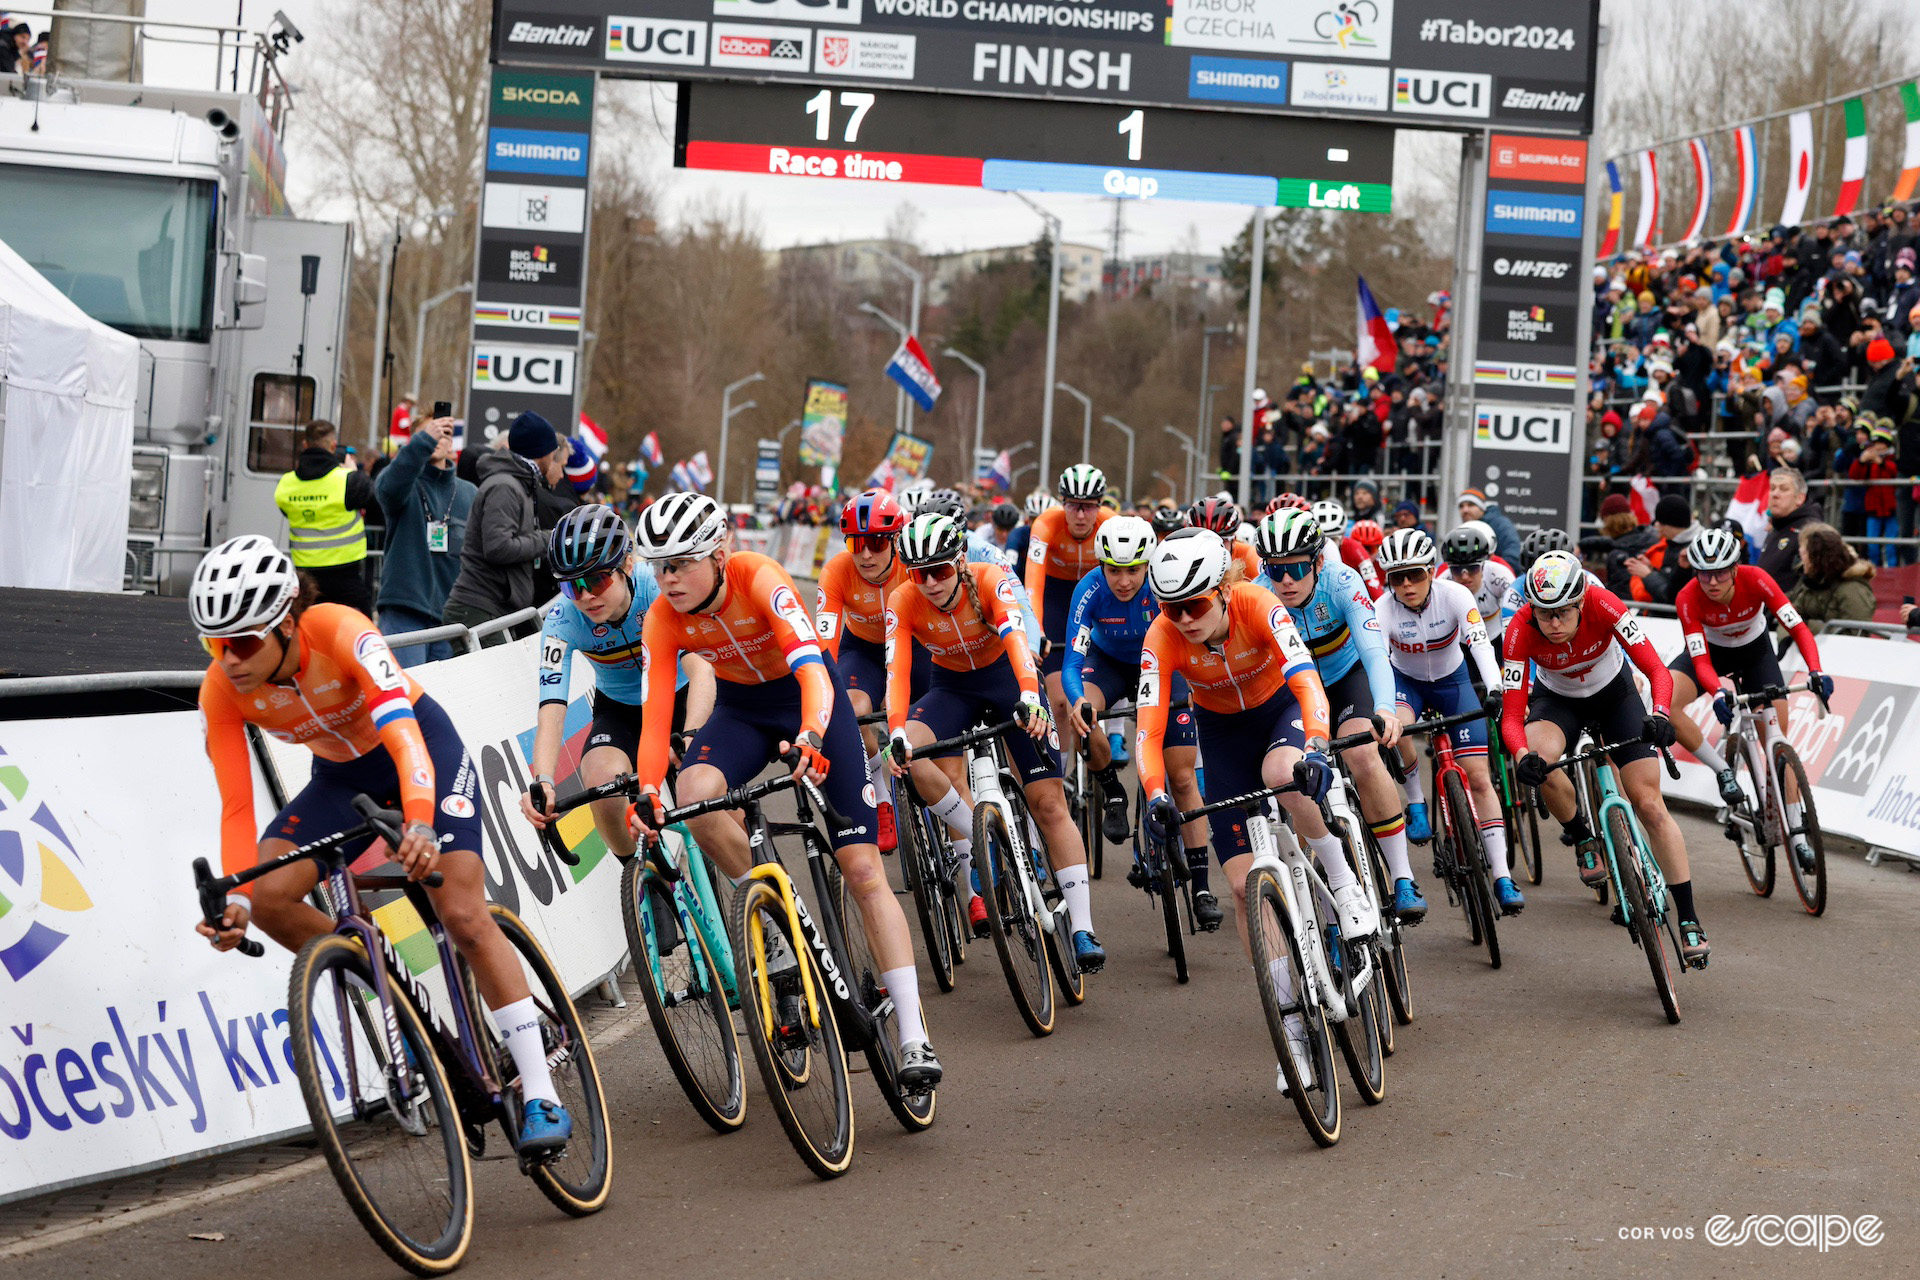 The elite women are led by Dutch riders during the 2024 Cyclo-Cross World Championships in Tábor.